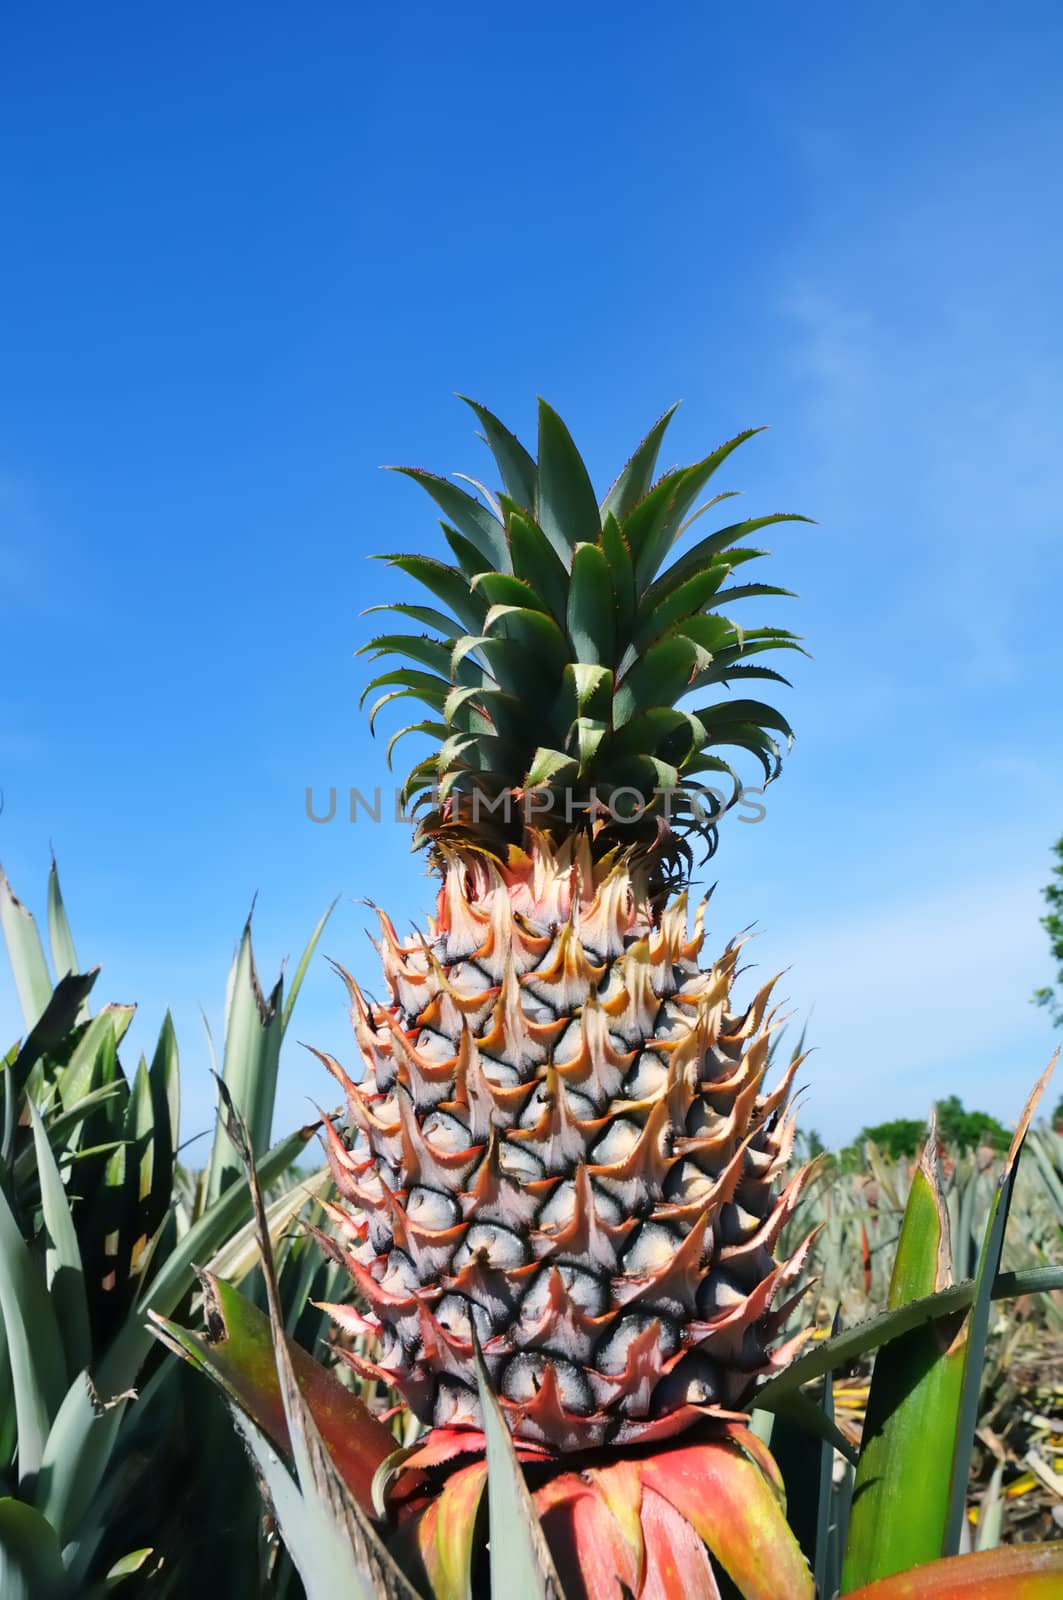 Pineapple against blue sky in a plantation.